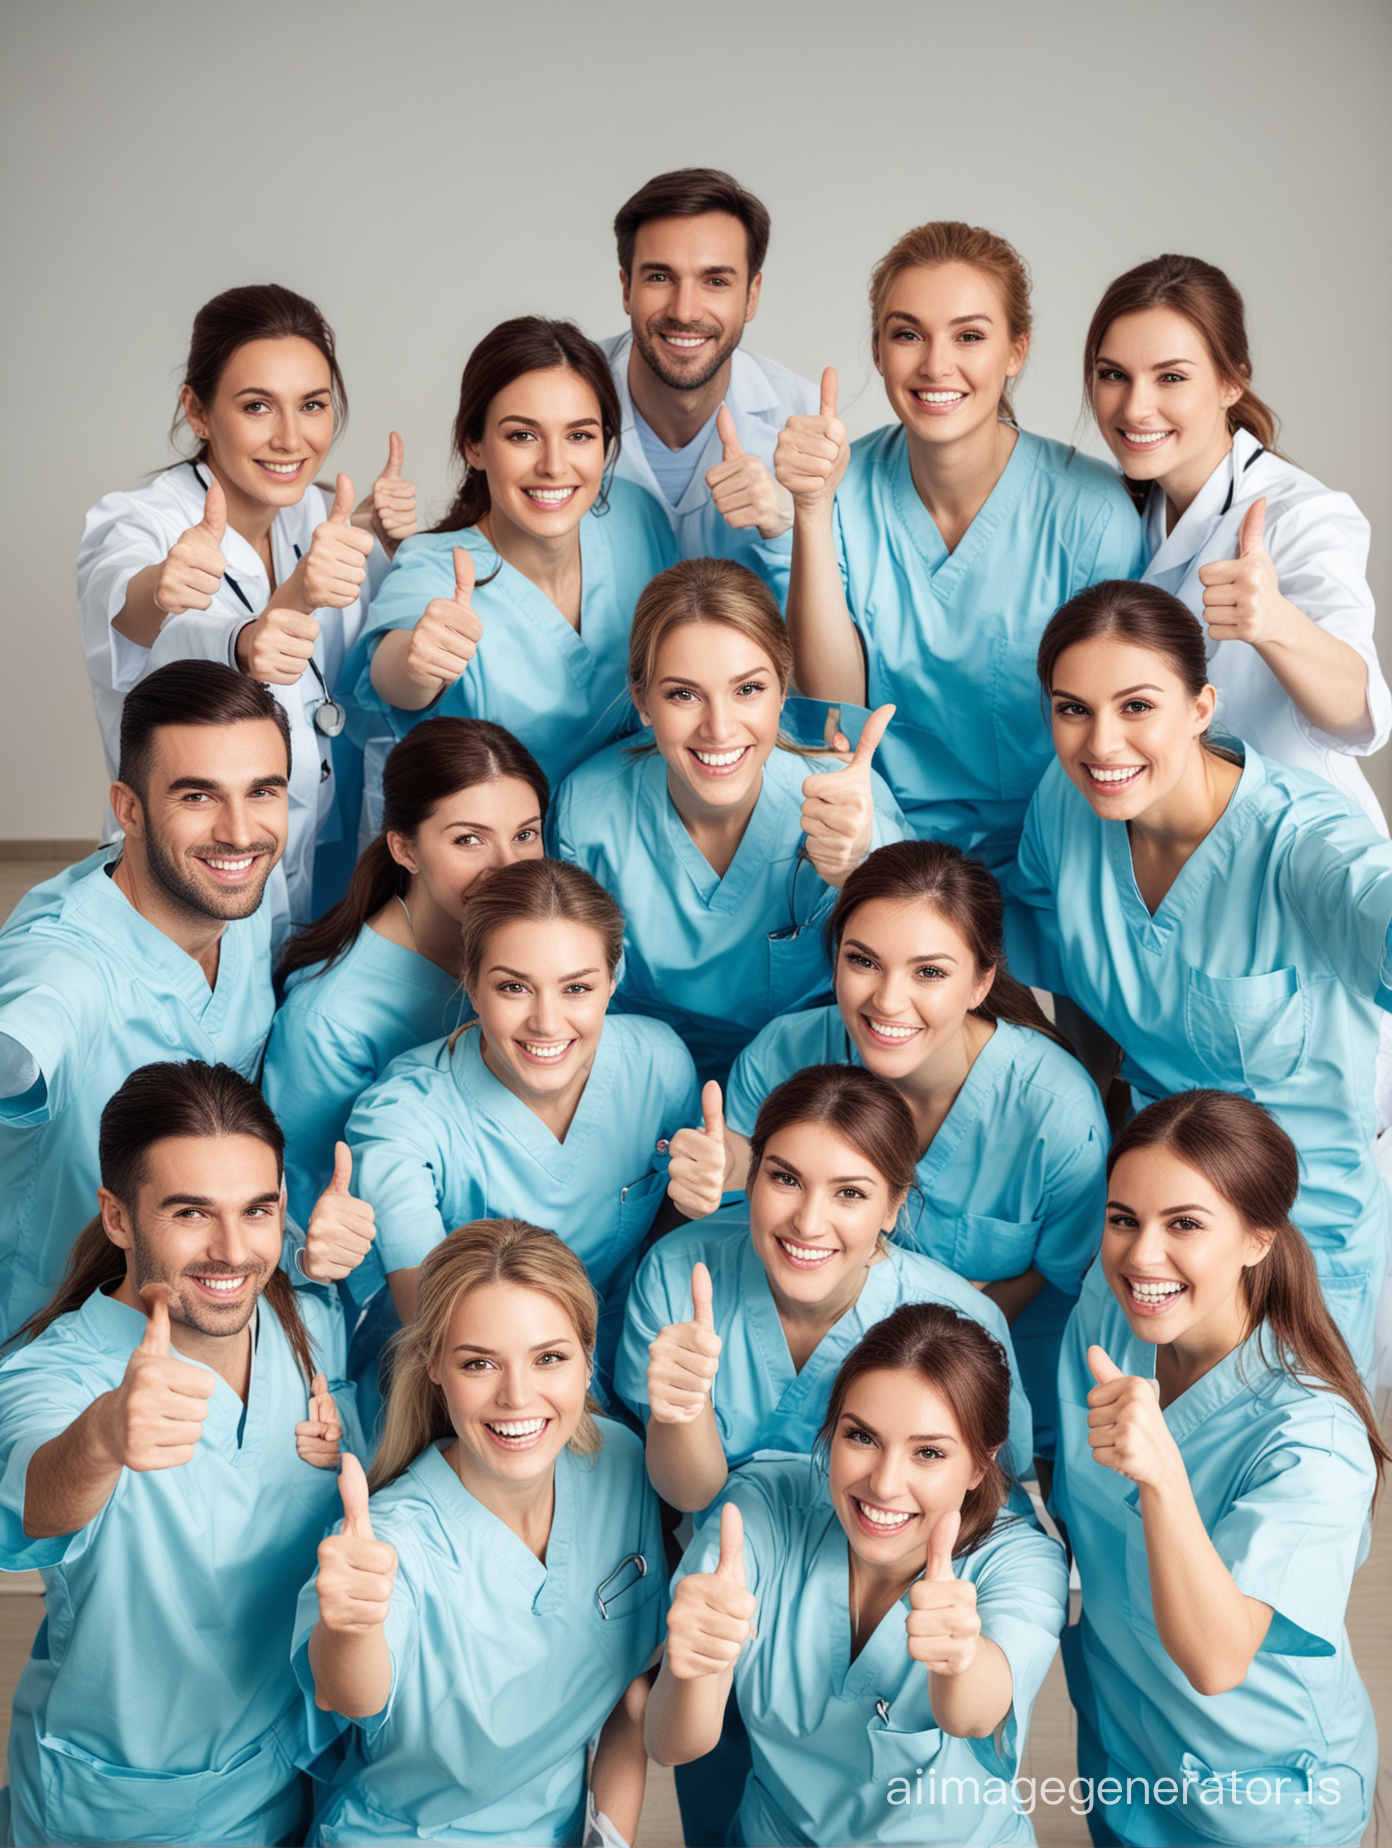 DENTISTRY TEAM DOCTOR AND NURSE. 10 PEOPLE GIVING THUMBS UP